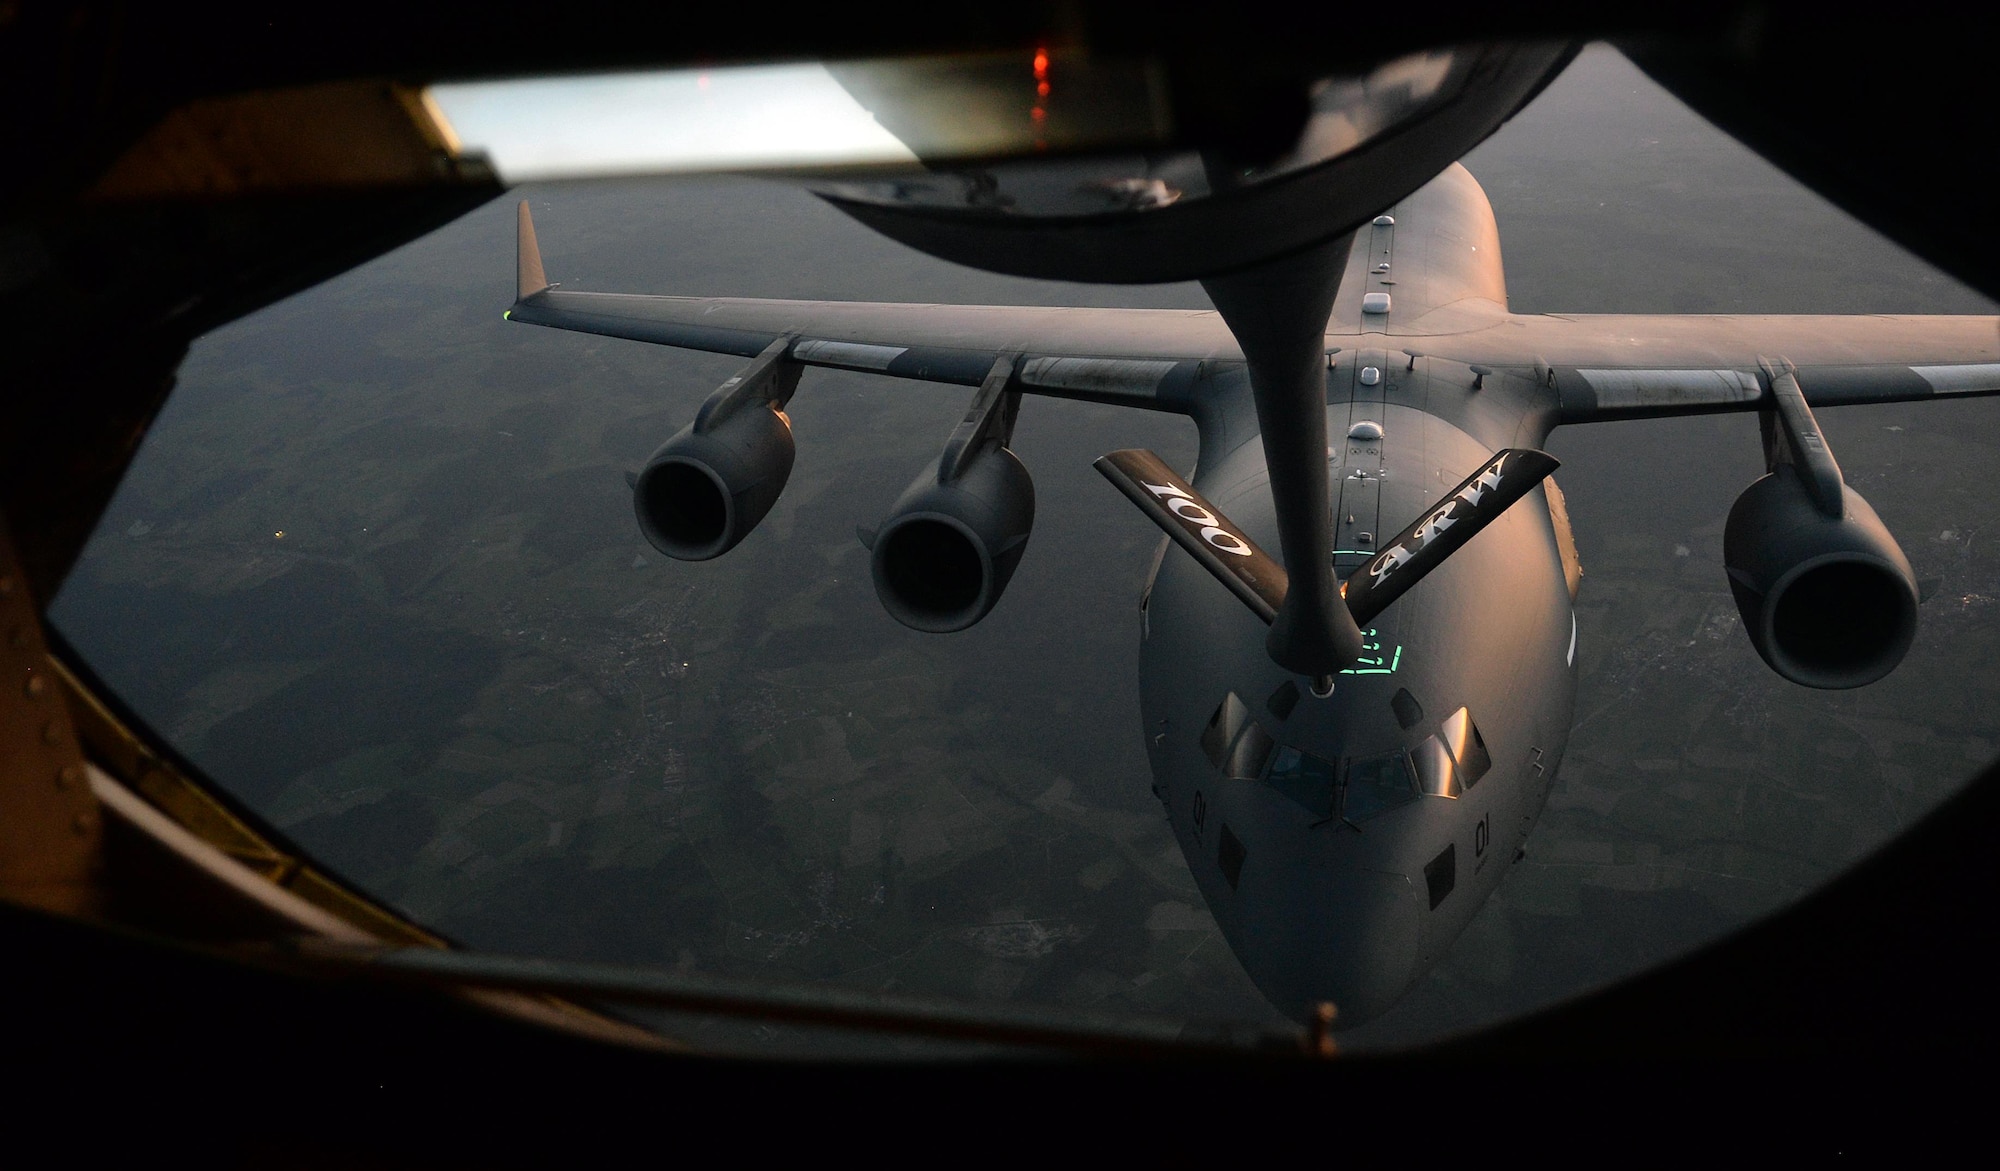 A C-17 Globemaster III flies behind a U.S. Air Force KC-135 during an aerial-refueling training exercise over Germany, Oct. 19, 2017. The C-17 operates out of Papa Air Base, Hungary, by the Heavy Airlift Wing which is made up of personnel from 12 countries. (U.S. Air Force photo by Airman 1st Class Luke Milano)